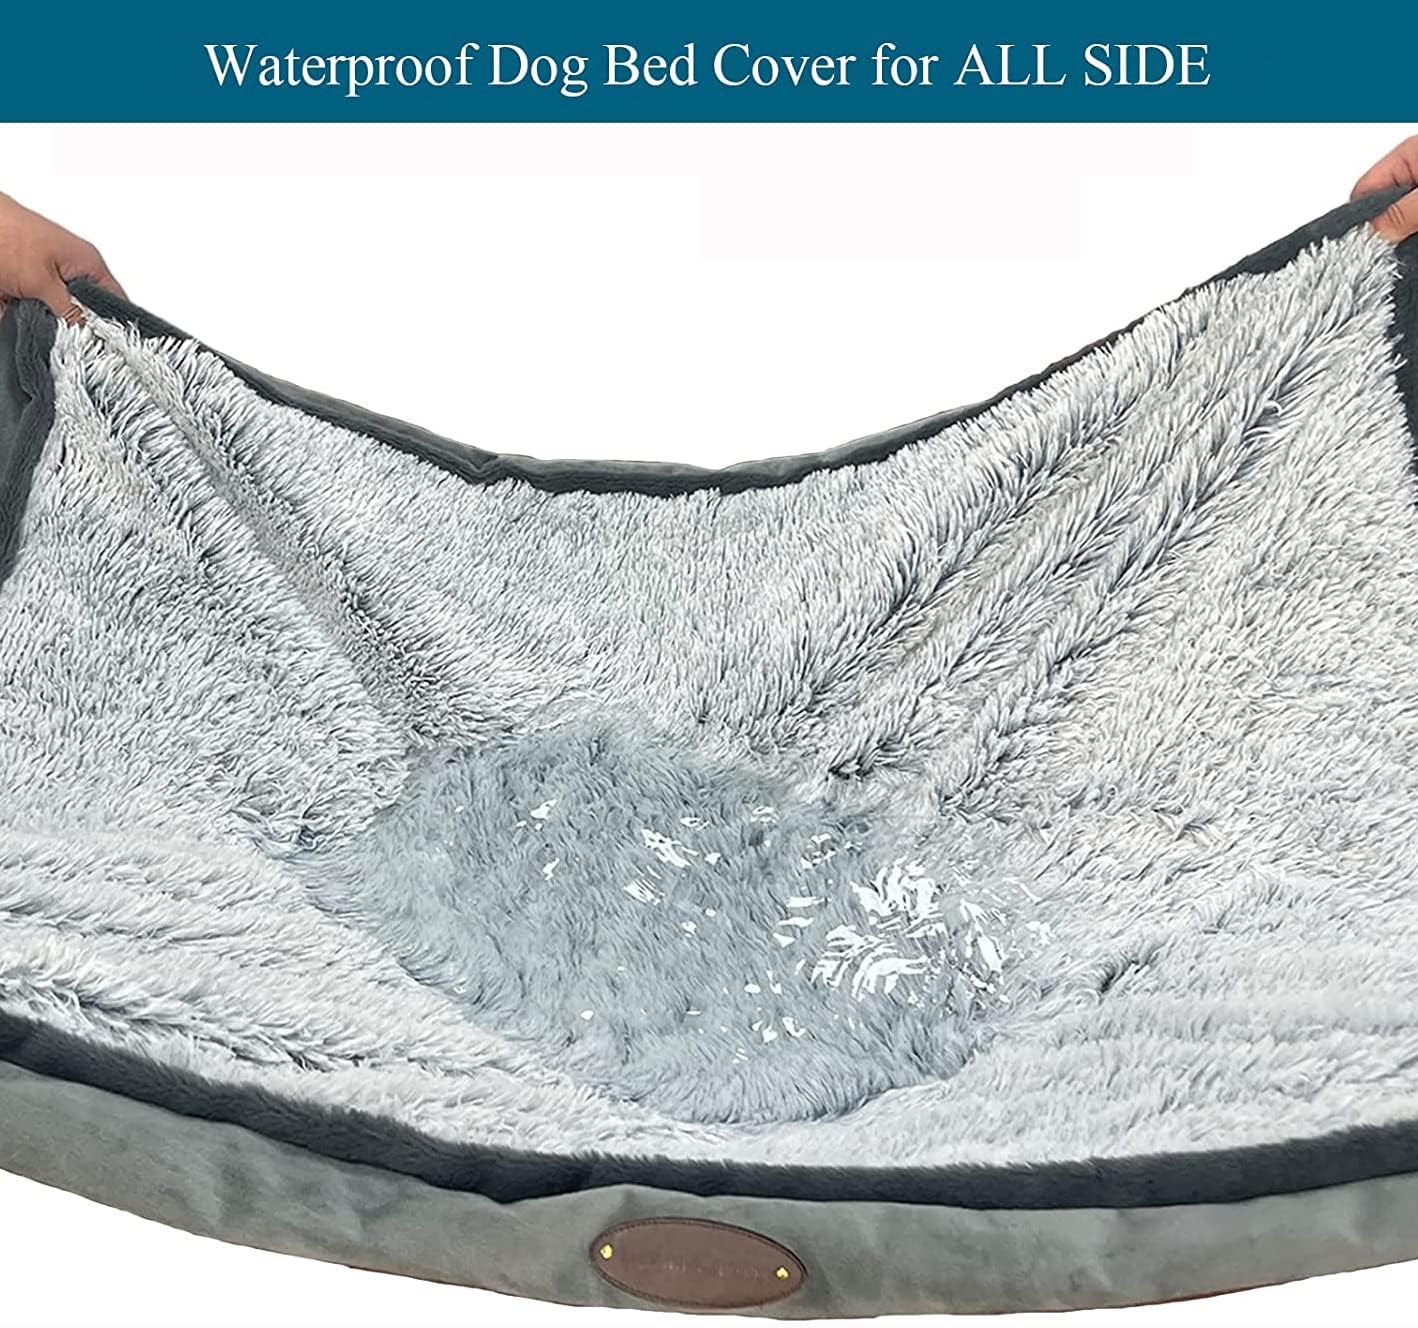 DEBANG HOME Large Dog Bed for Large Dogs,Dog Beds for Medium Dogs,Waterproof Dog Bed,Soft and Comfortable Plush Dog mat,Anxiety Comfy Durable Pet Beds with Removable Washable Cover